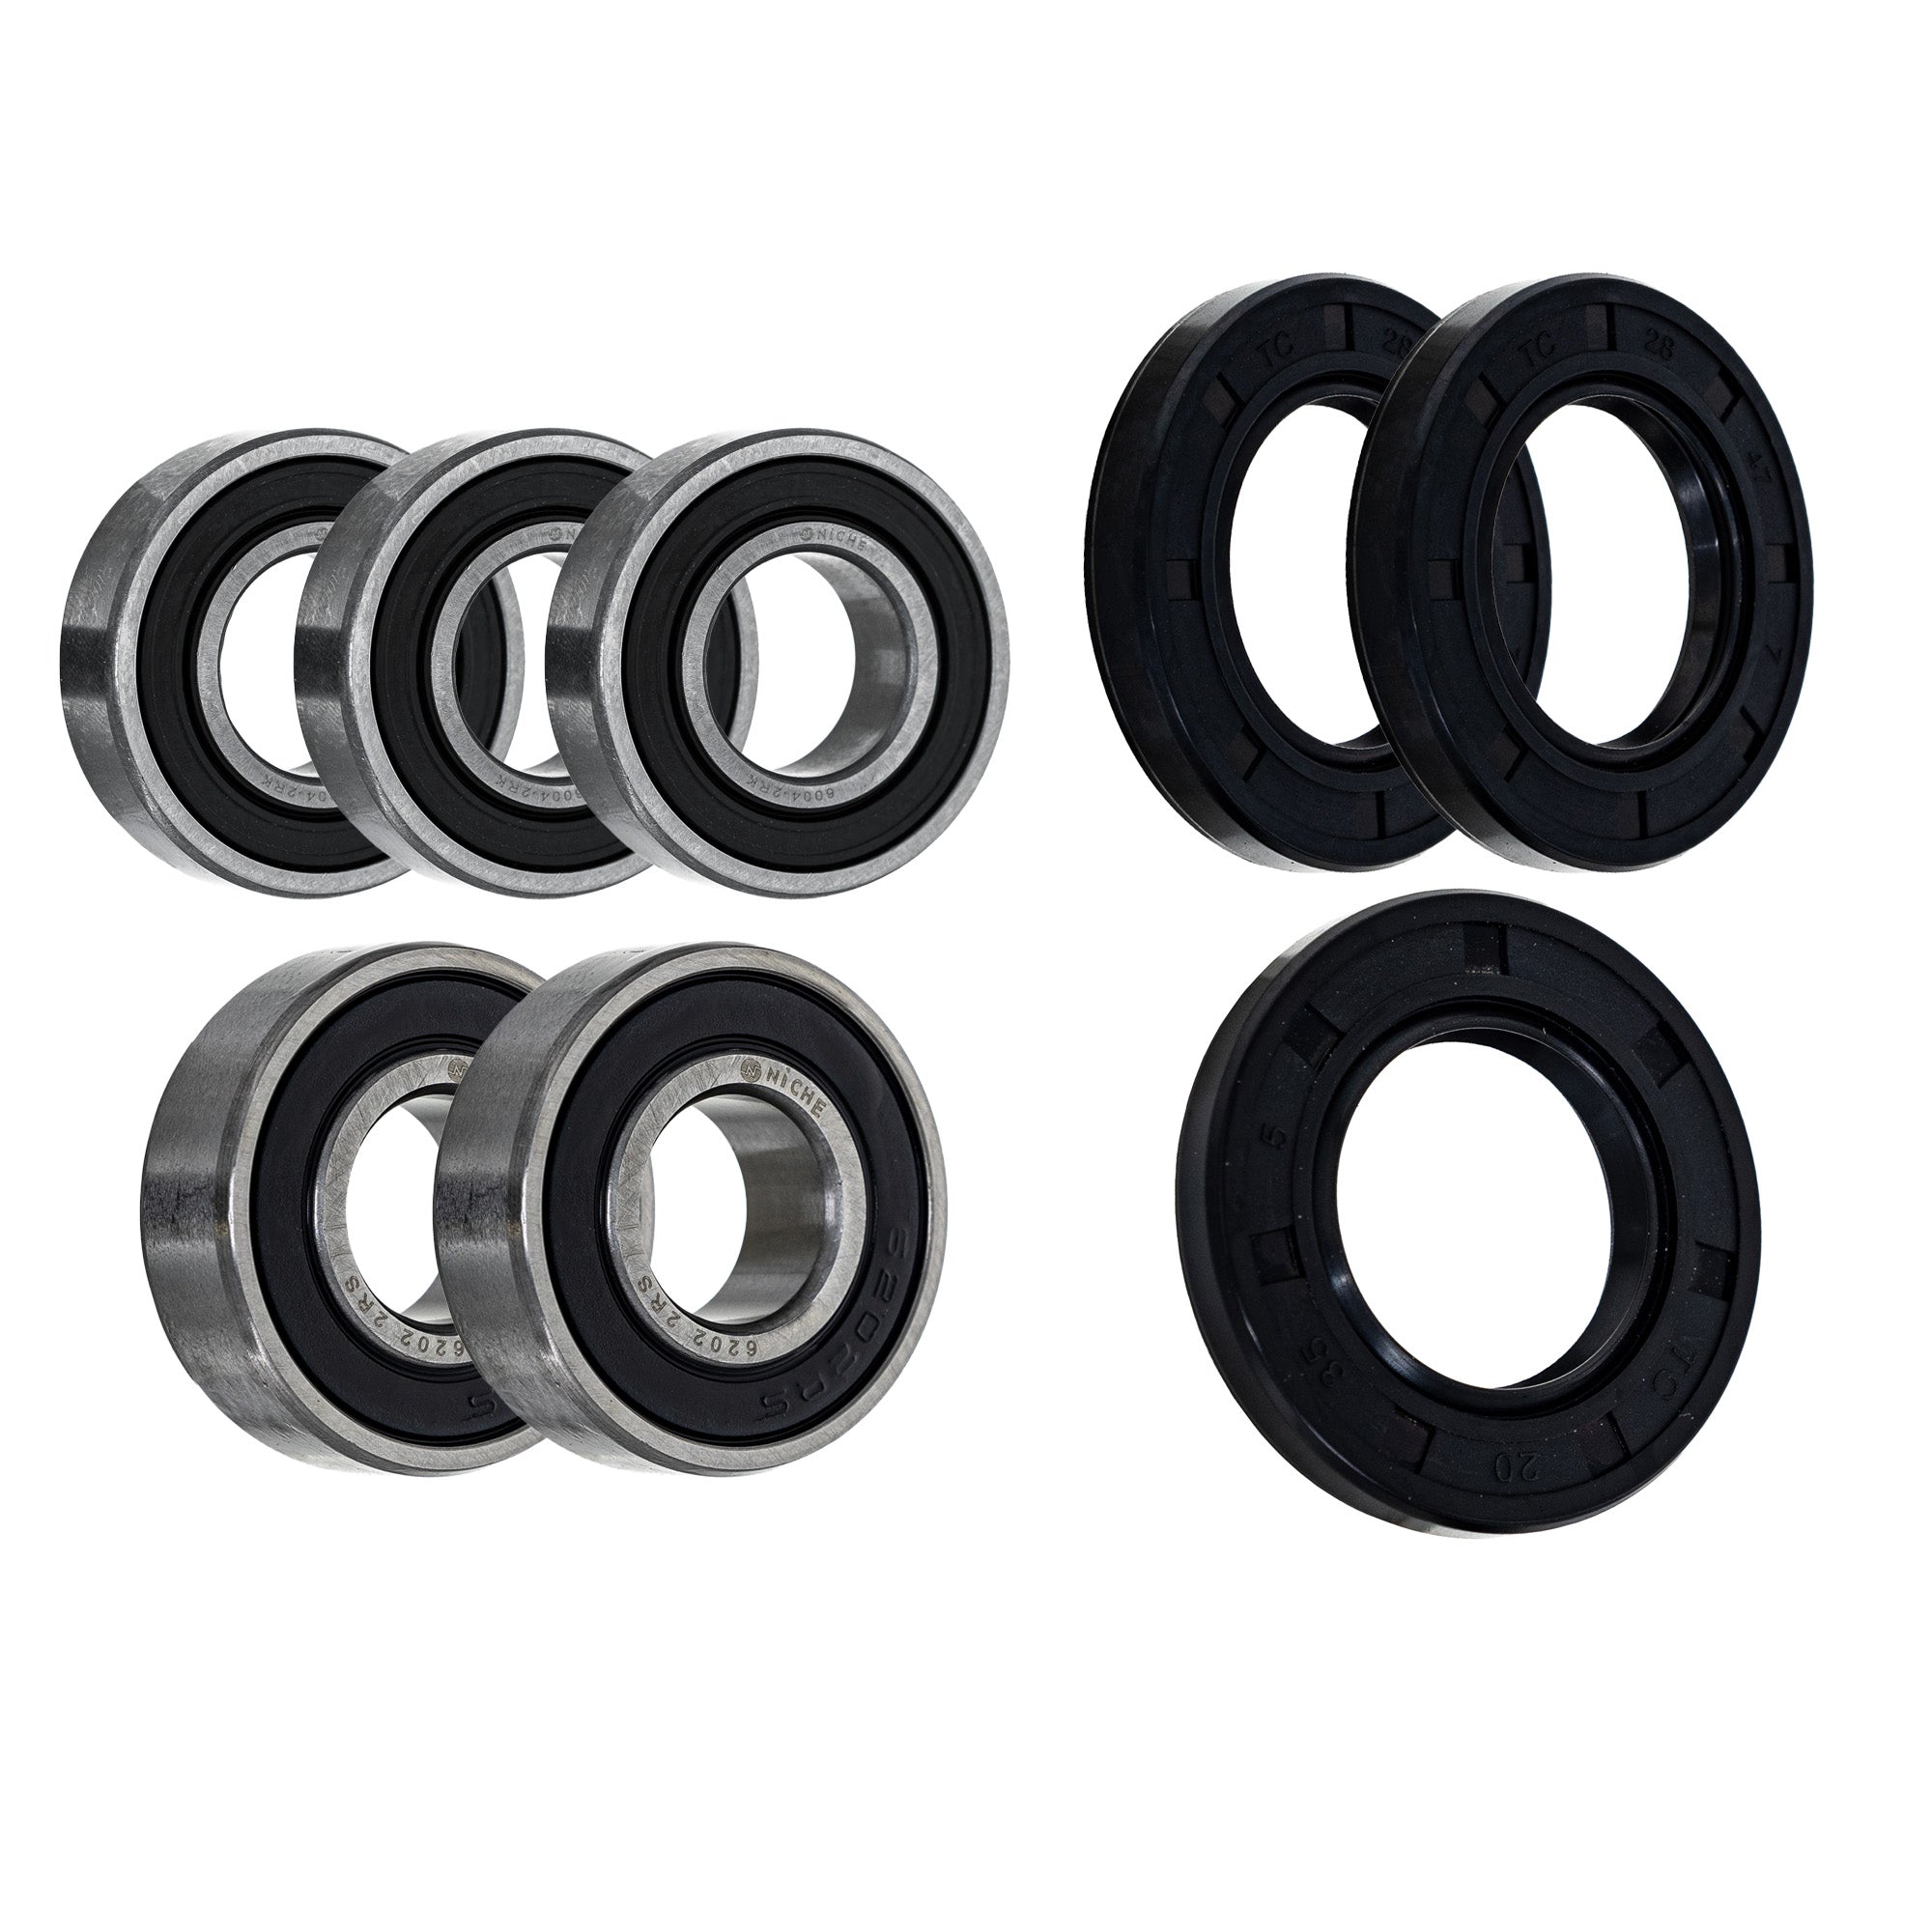 Wheel Bearing Seal Kit for zOTHER Ref No YZ250 YZ125 WR250 WR200 NICHE MK1008720